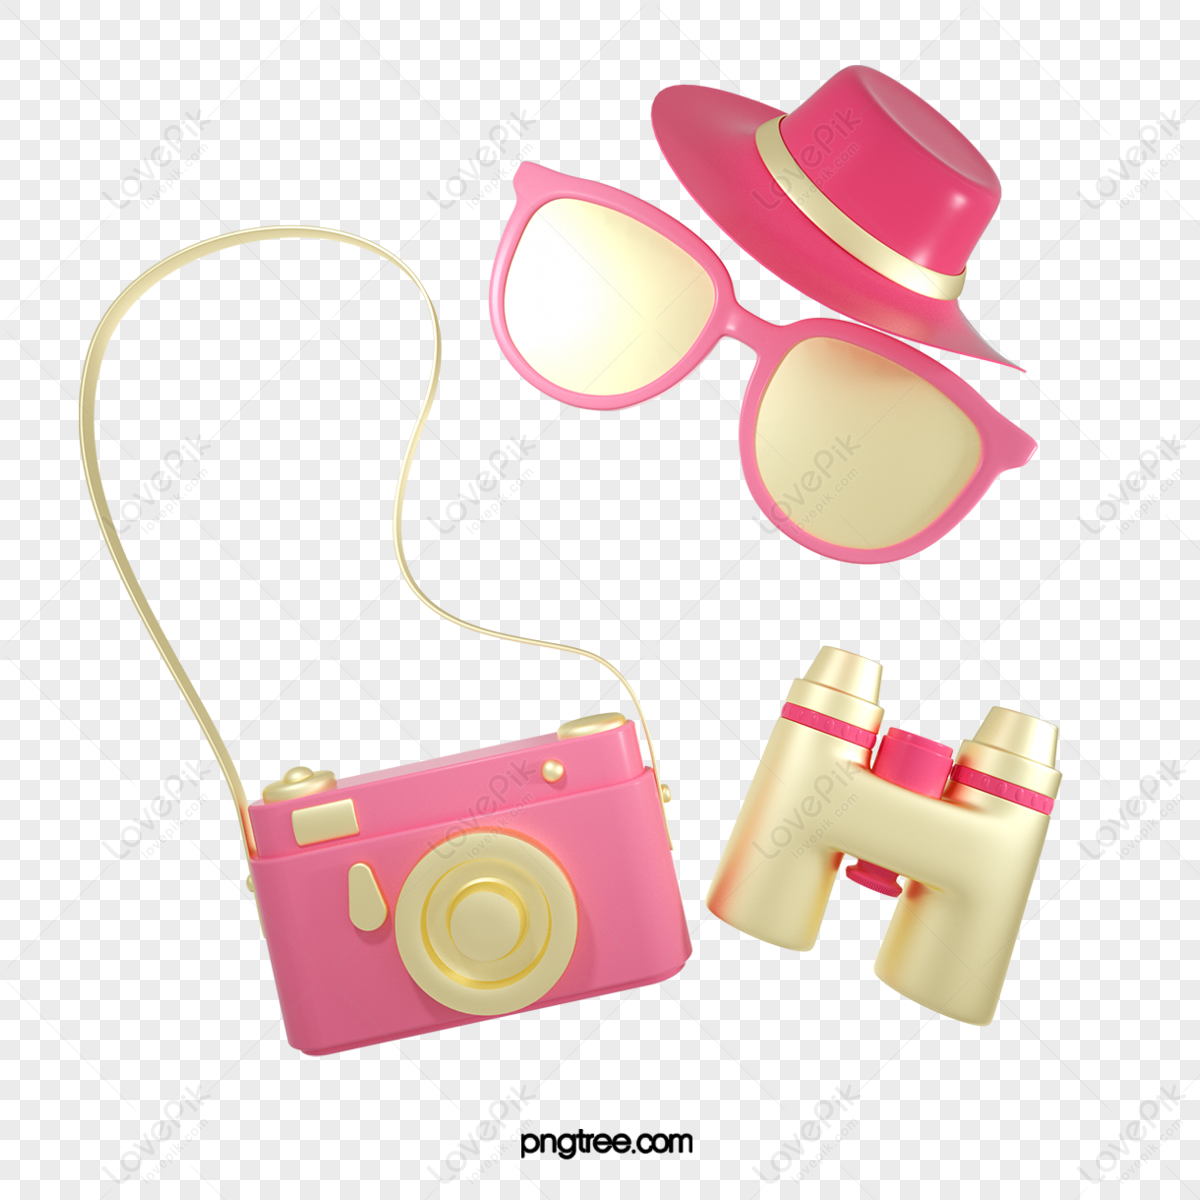 3d stereo pink cute travel,pink tender,camera logo,telescope png image free download